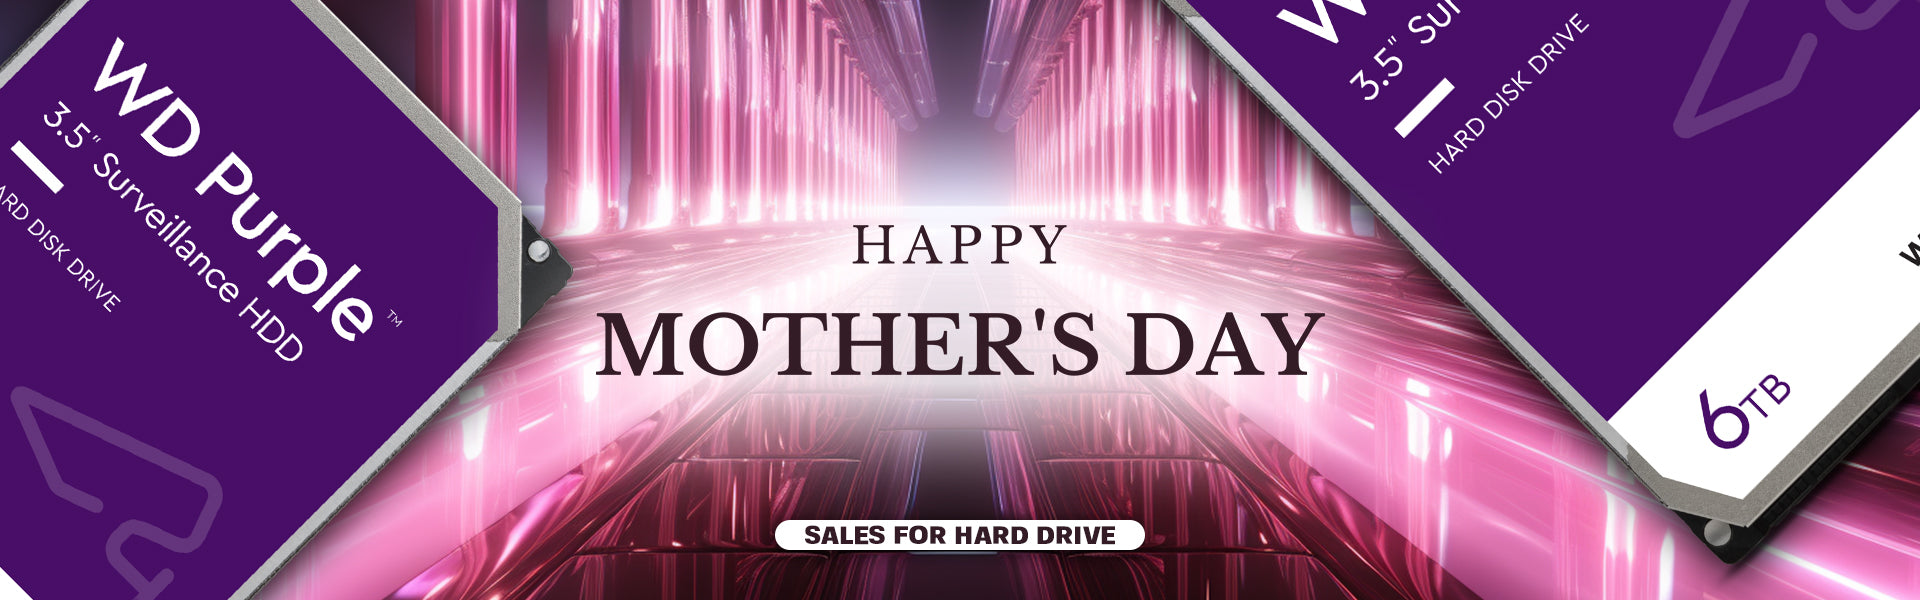 Hard Drive Sale - Mother's Day